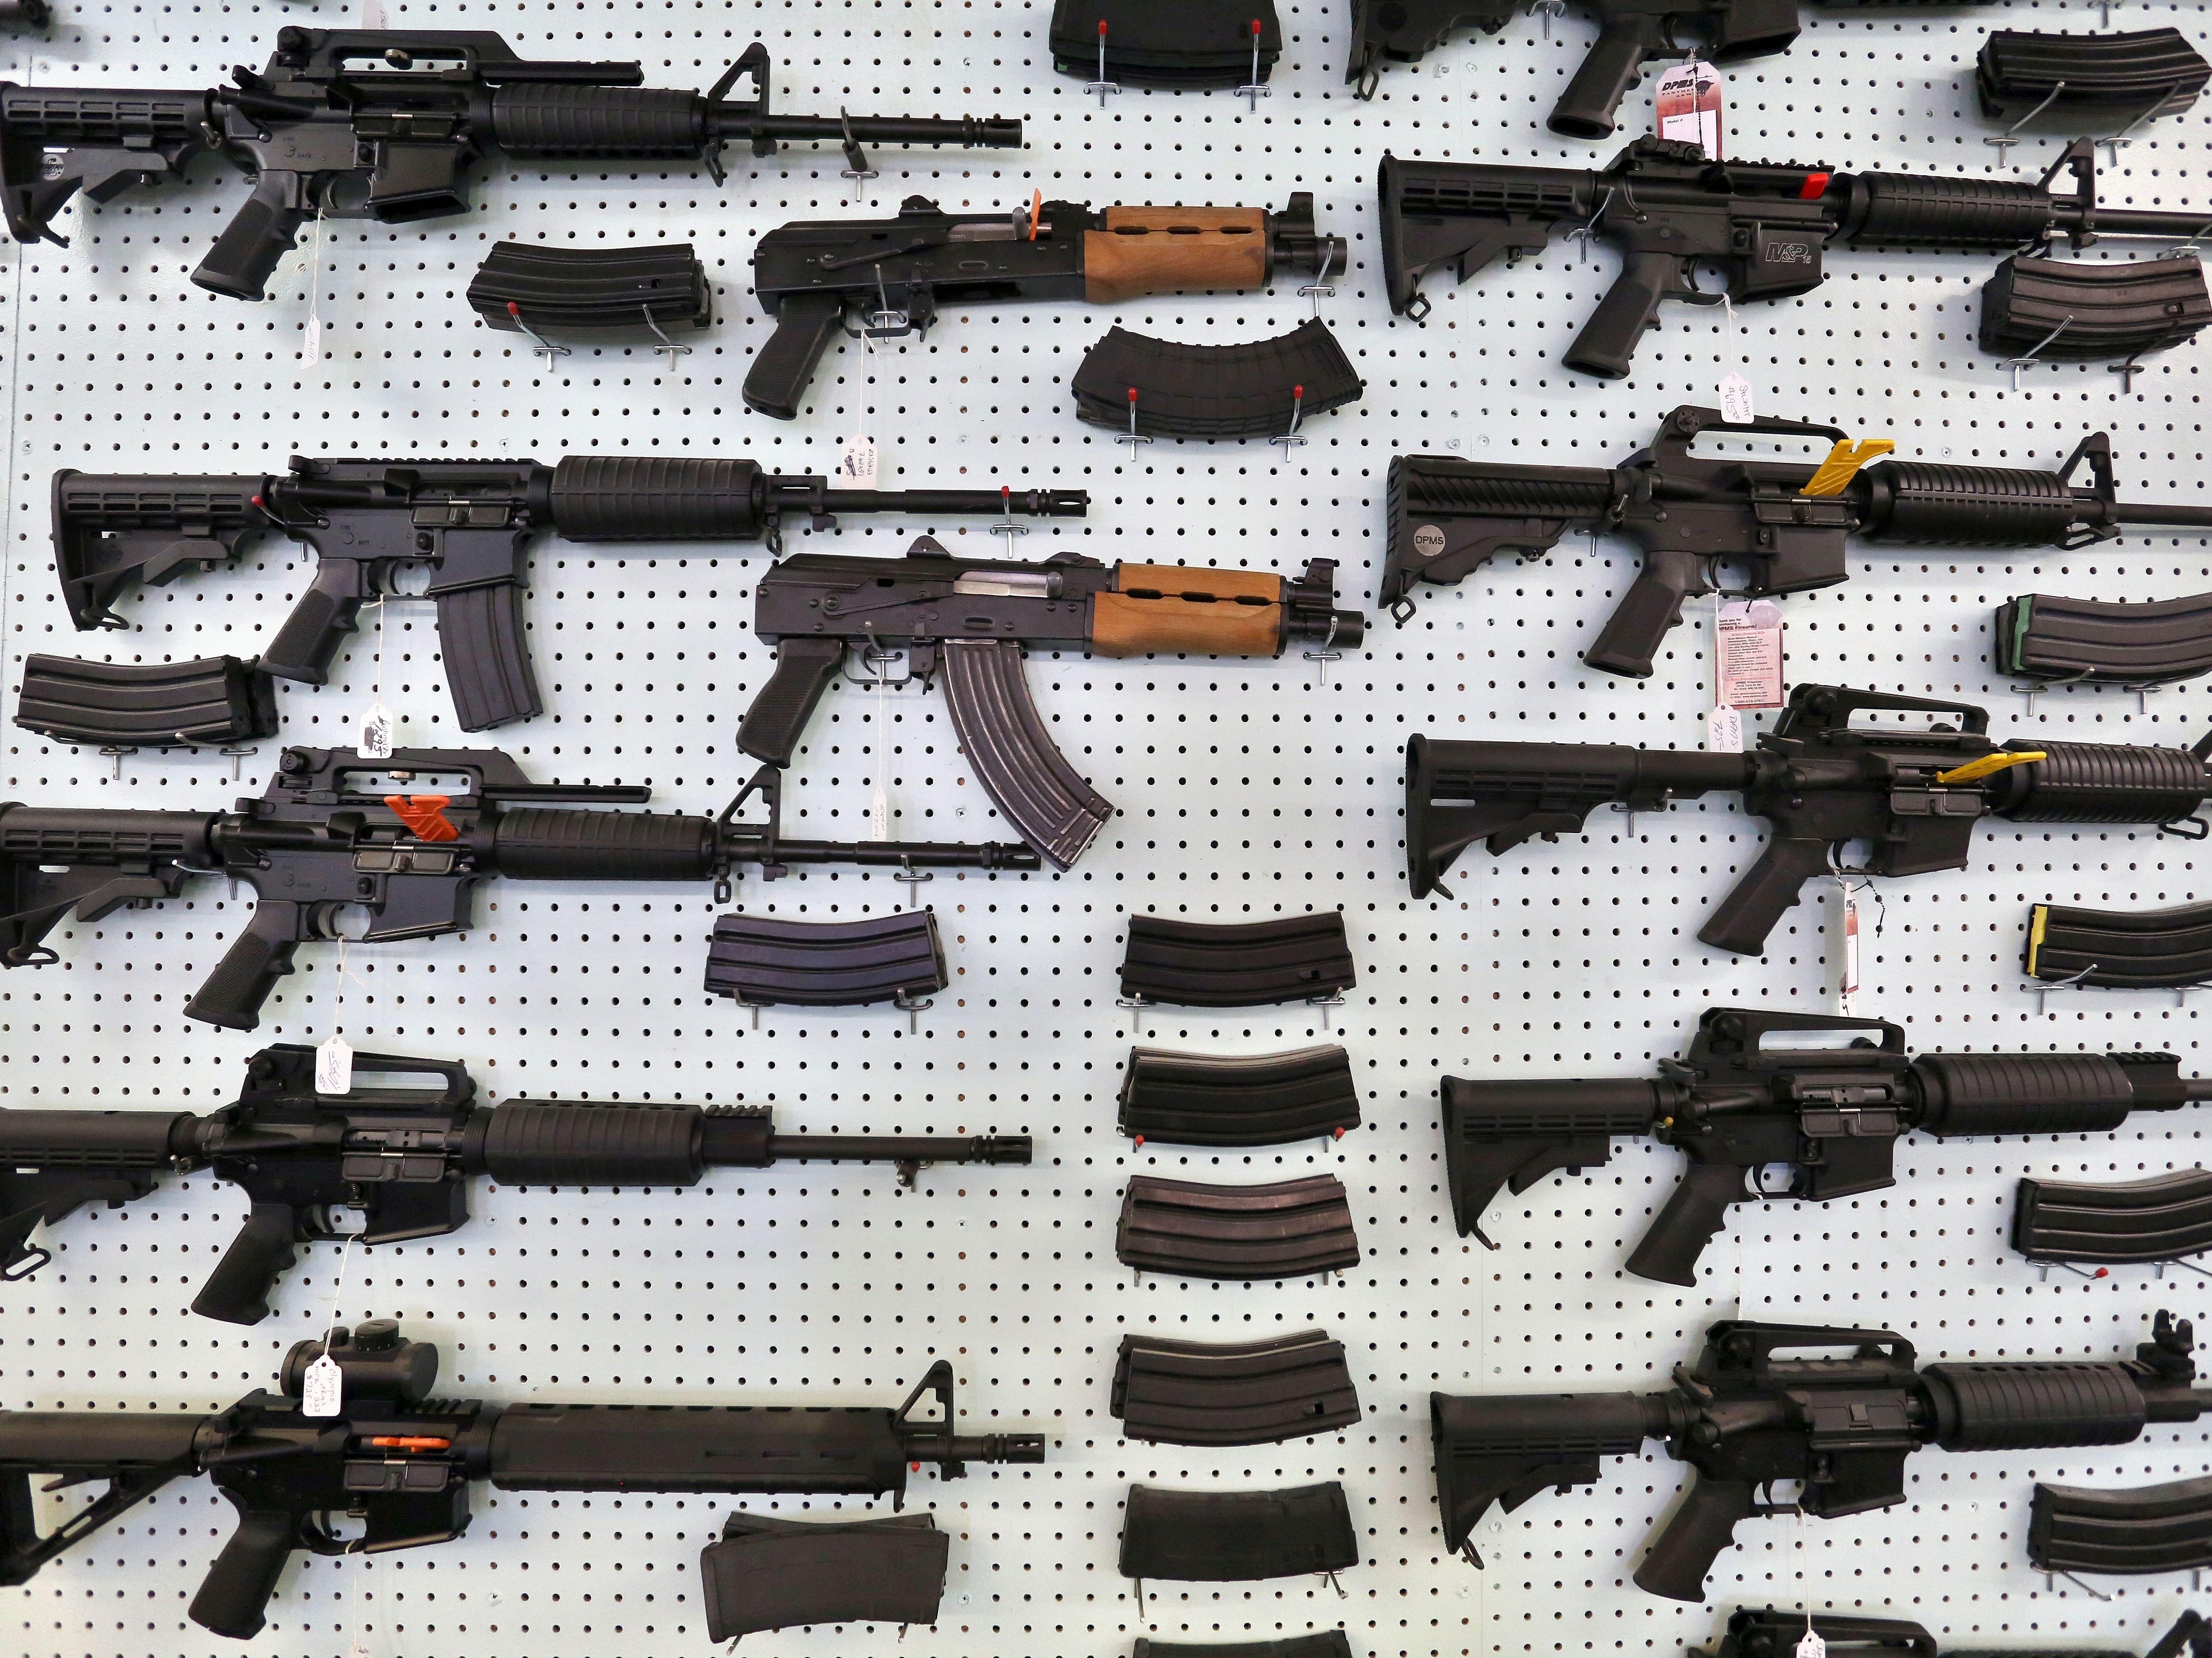 Black Friday Gun Background Checks Reportedly Soar To Record High